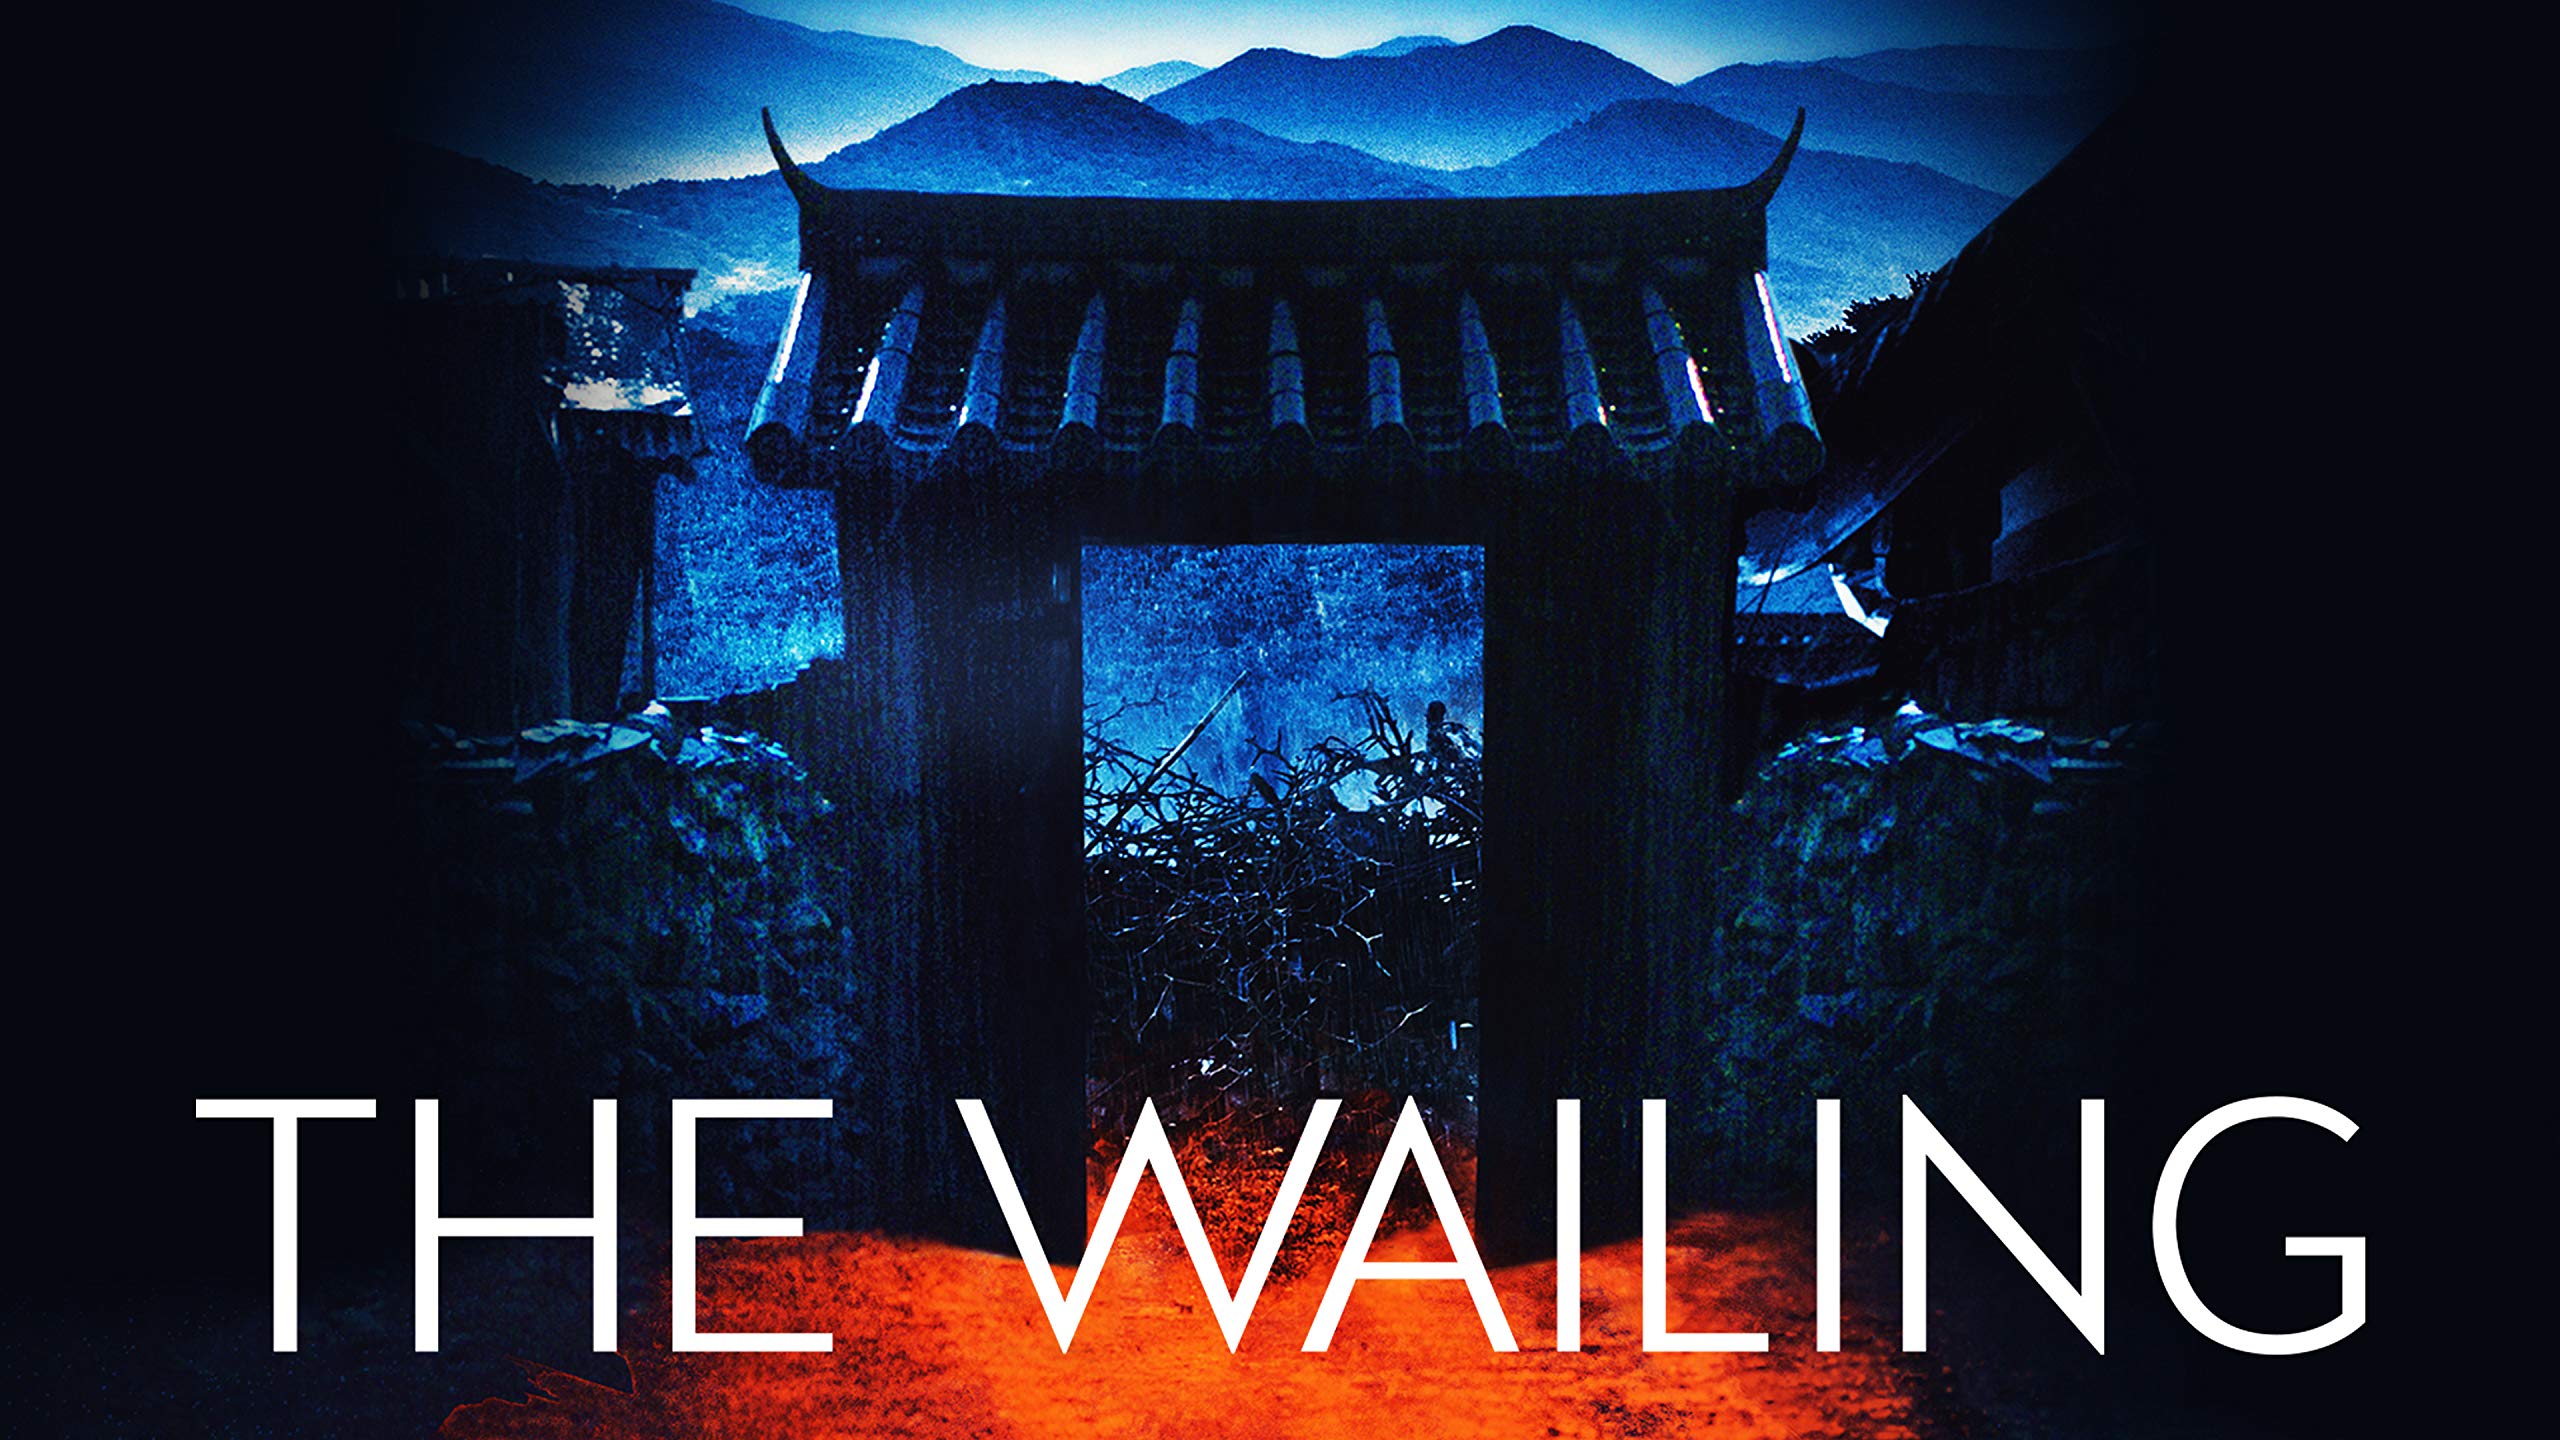 Movie #216 2021: The Wailing (2016) – The Quayside Review